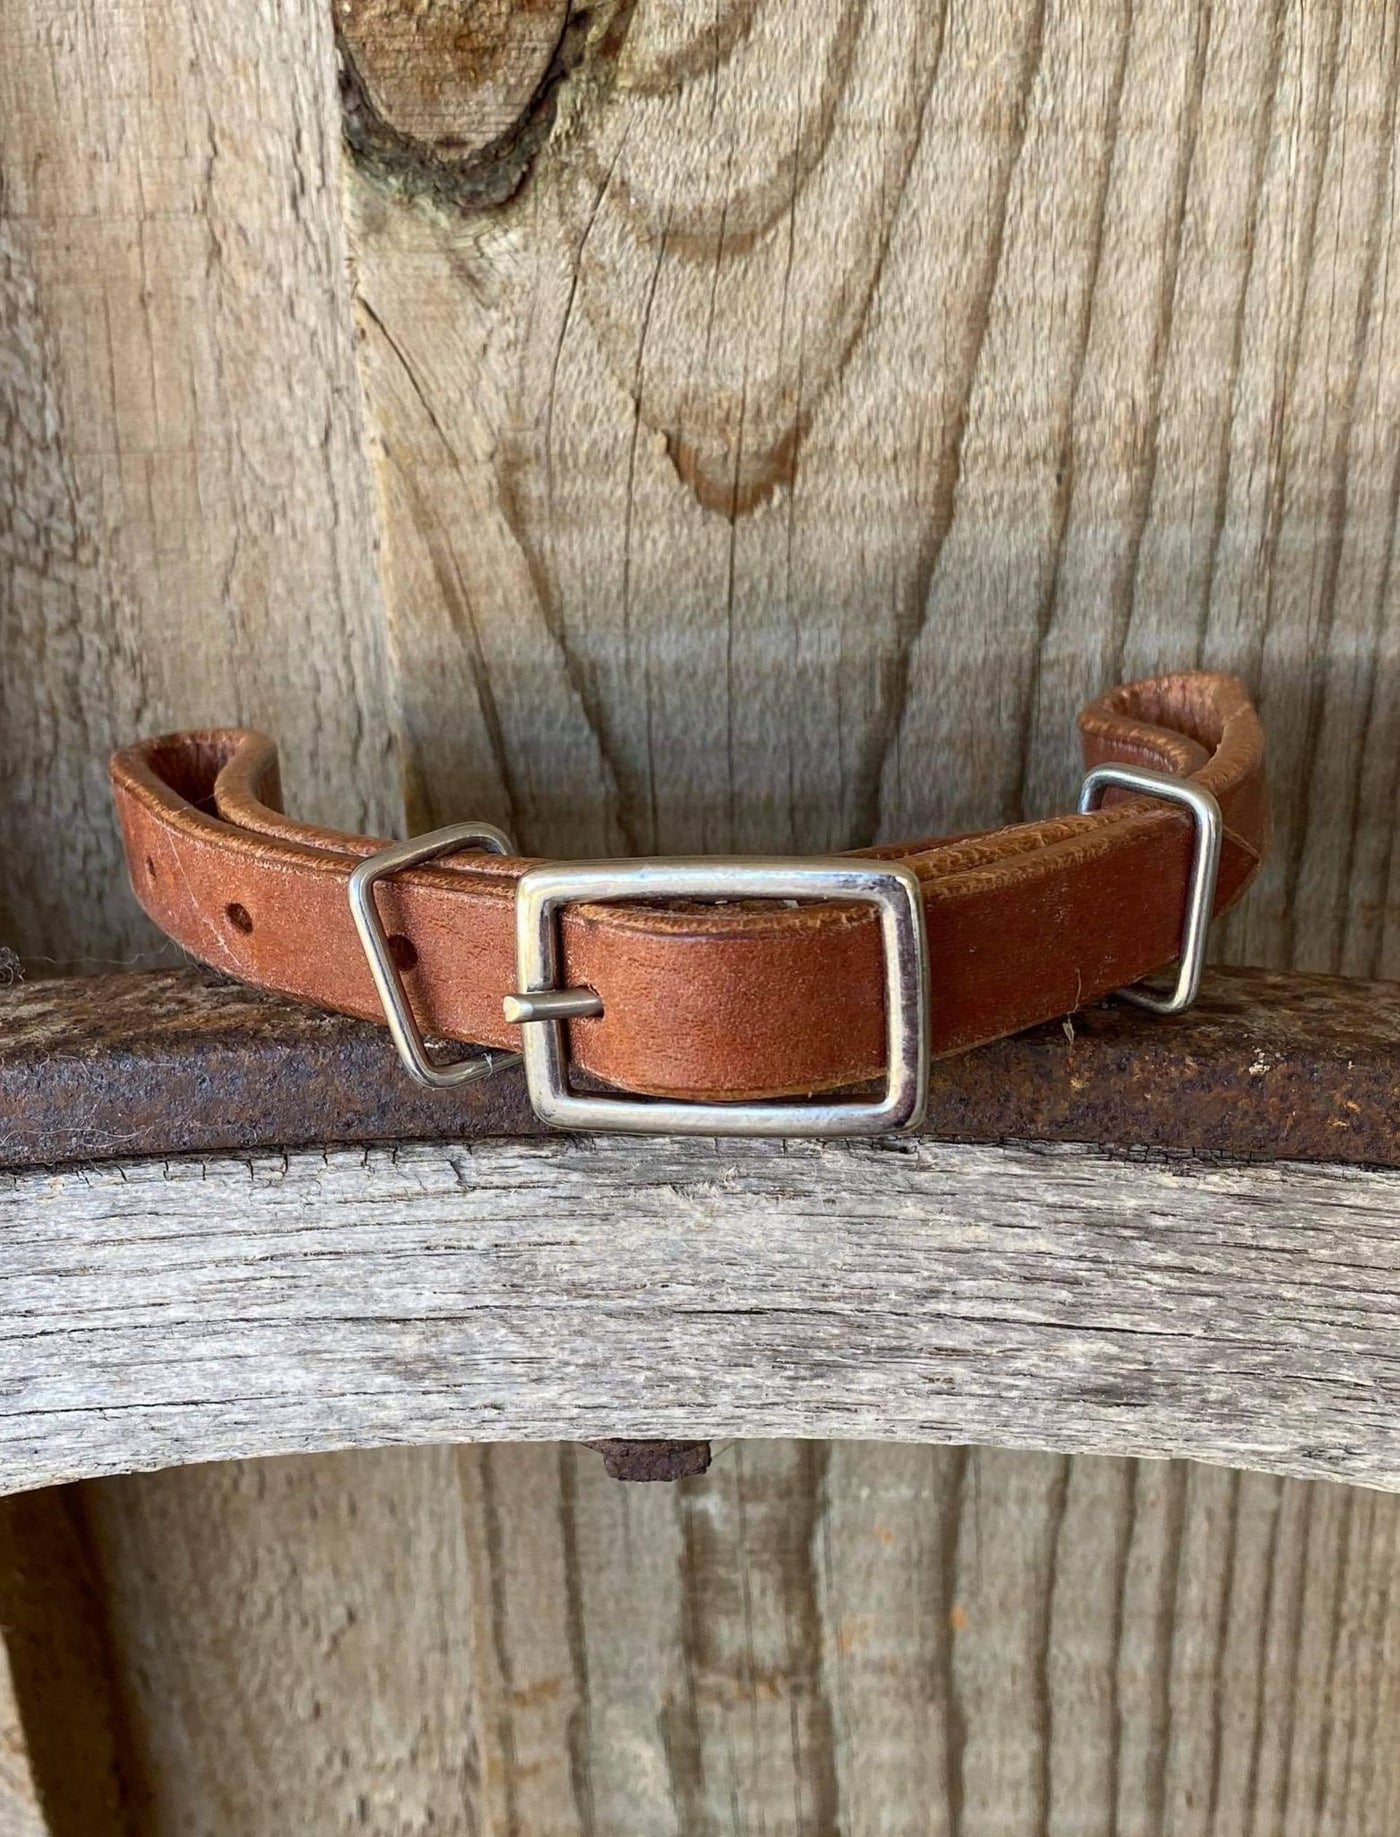 Curb Strap - Harness leather fully adjustable all leather curb strap